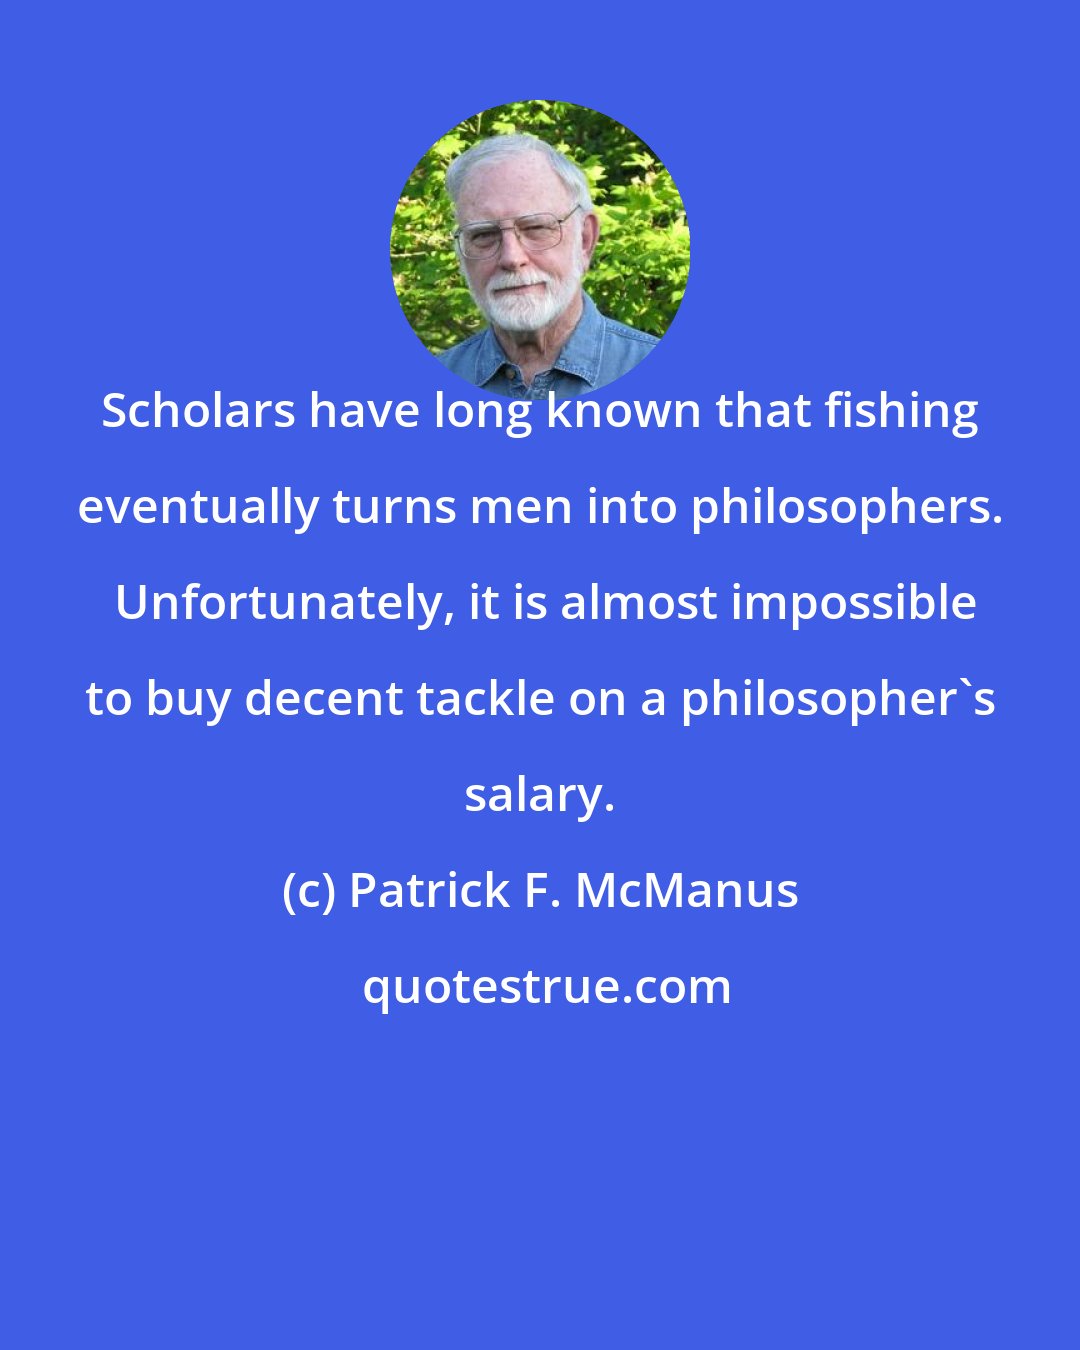 Patrick F. McManus: Scholars have long known that fishing eventually turns men into philosophers.  Unfortunately, it is almost impossible to buy decent tackle on a philosopher's salary.